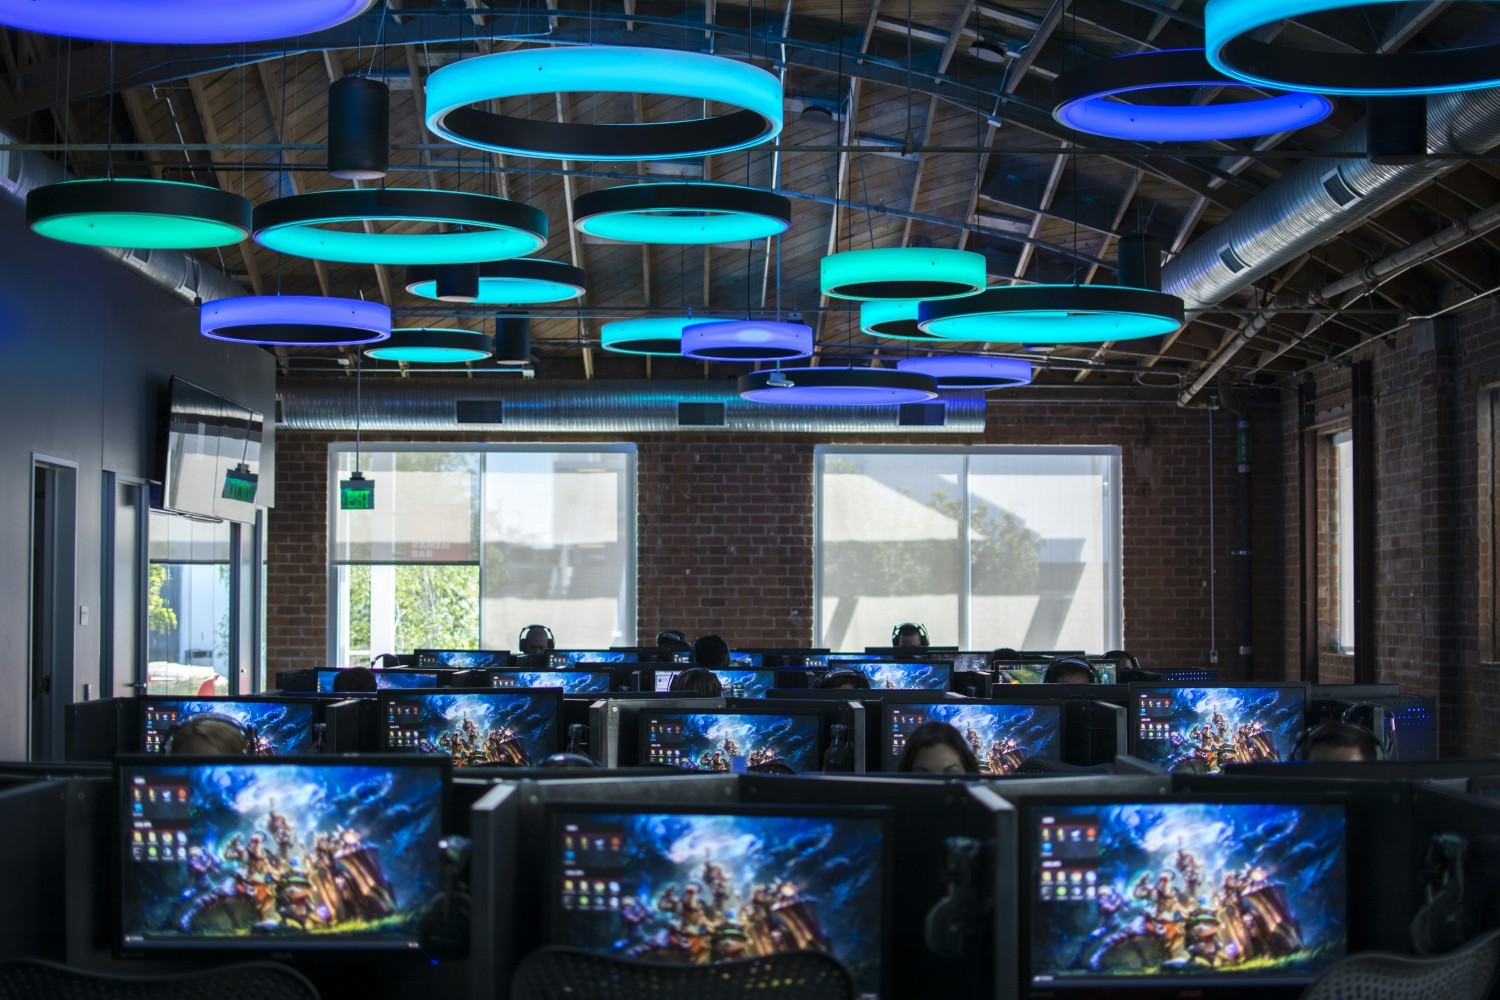 The game room in the Los Angeles campus.